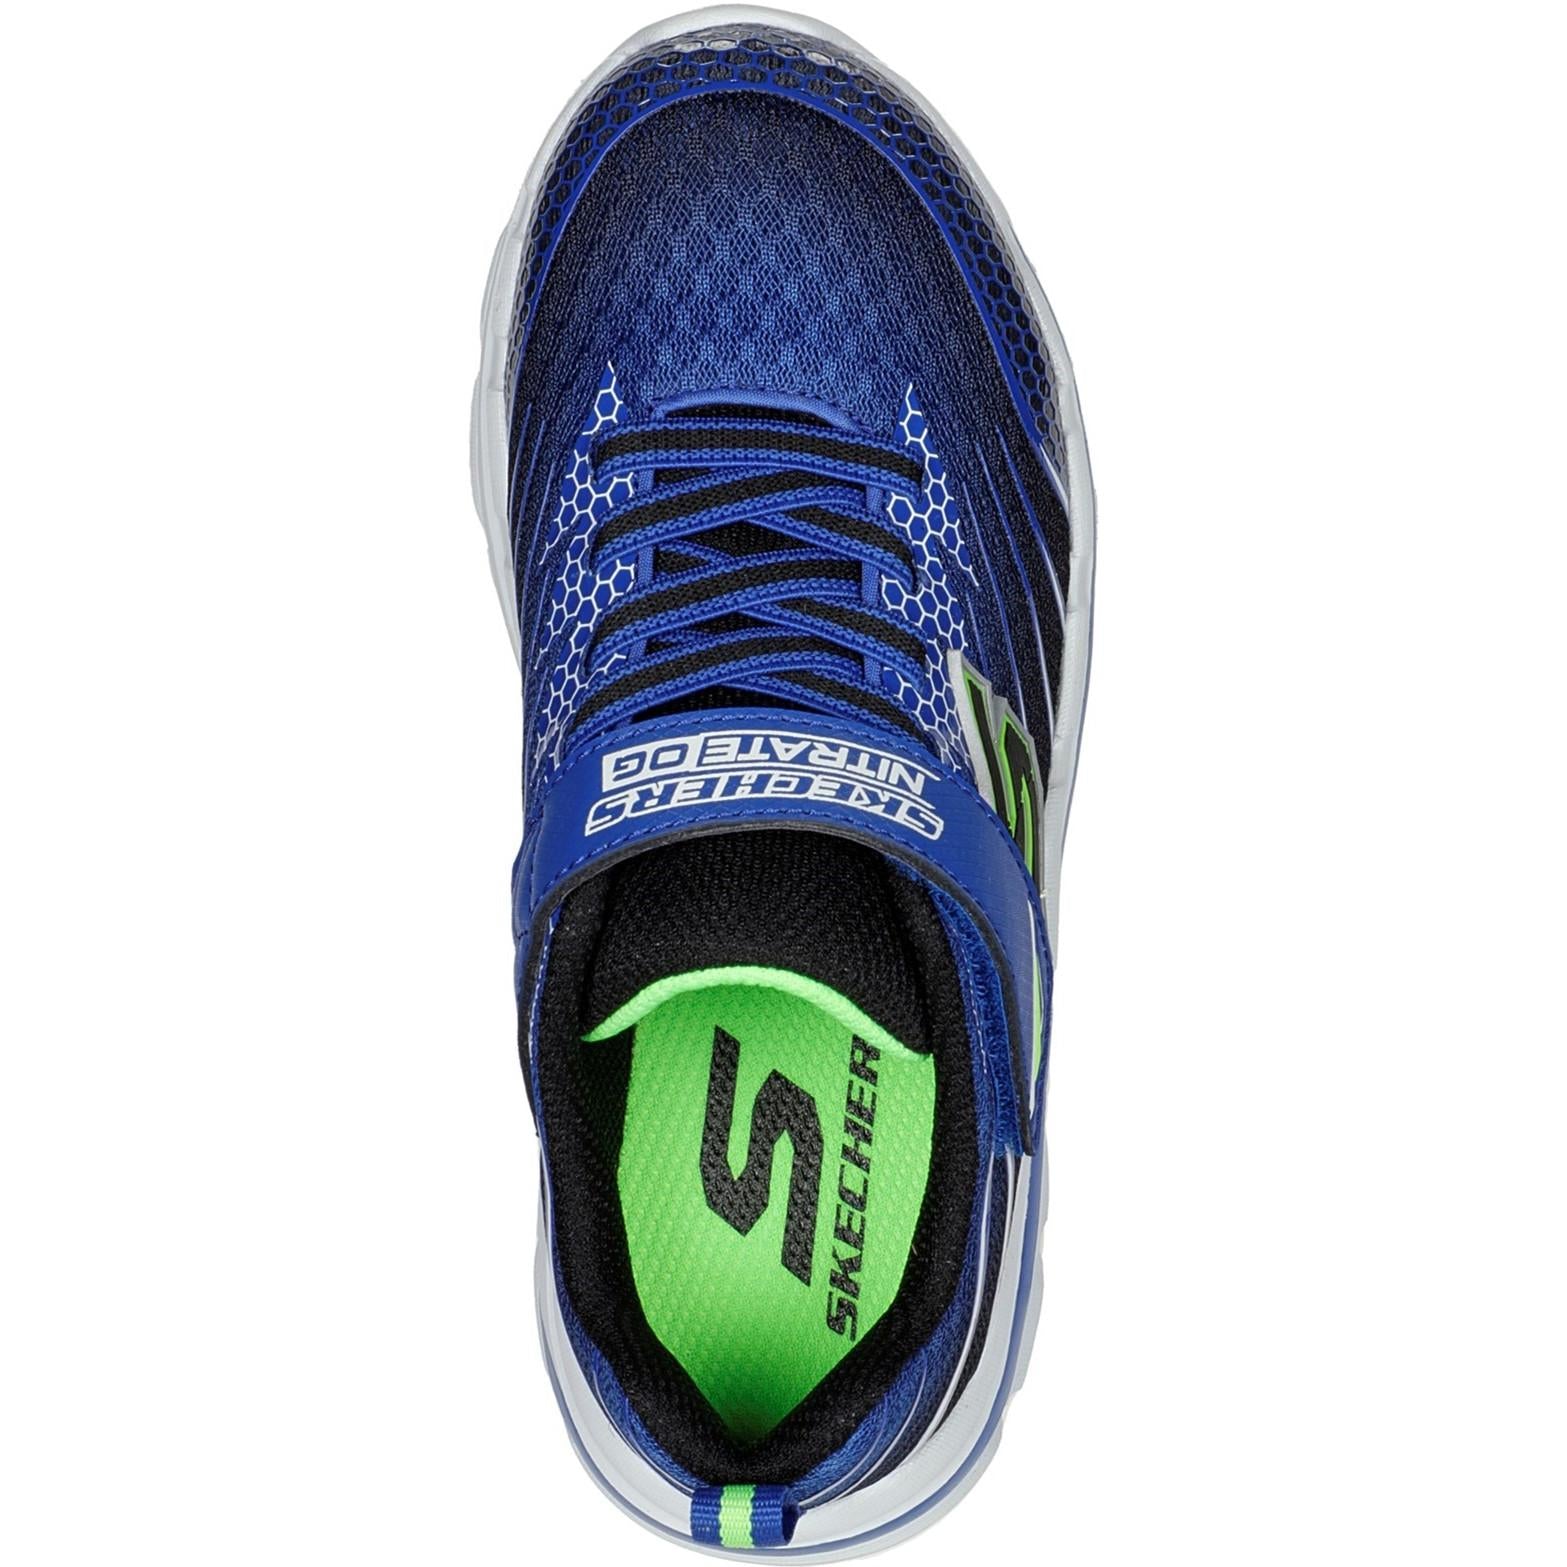 Skechers Nitrate Zulvox Trainers